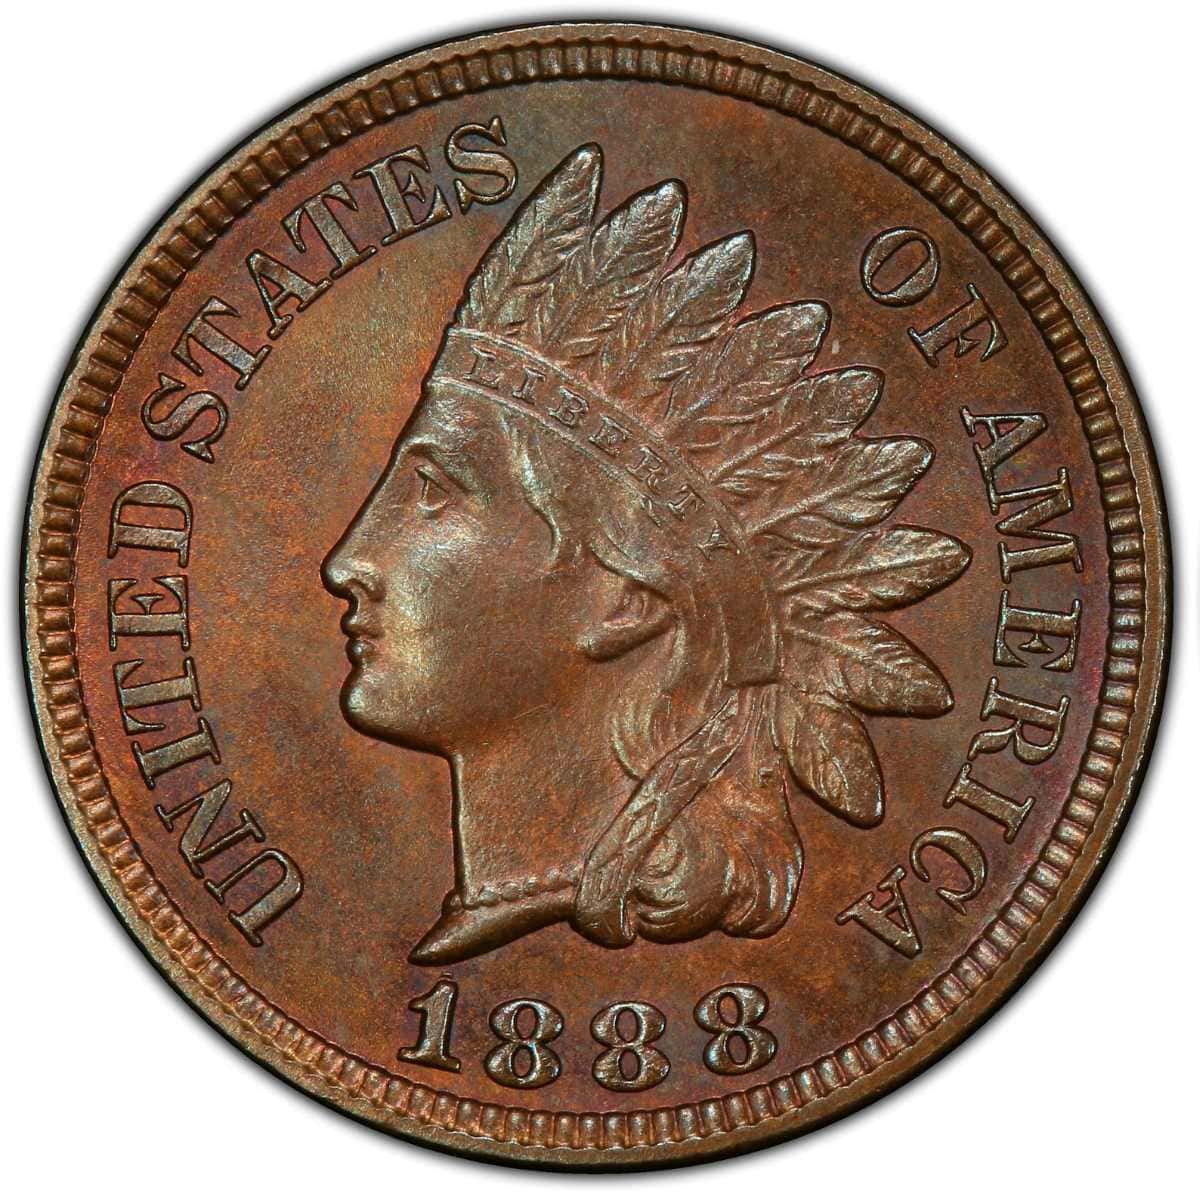 1888 Indian Head Penny obverse feature